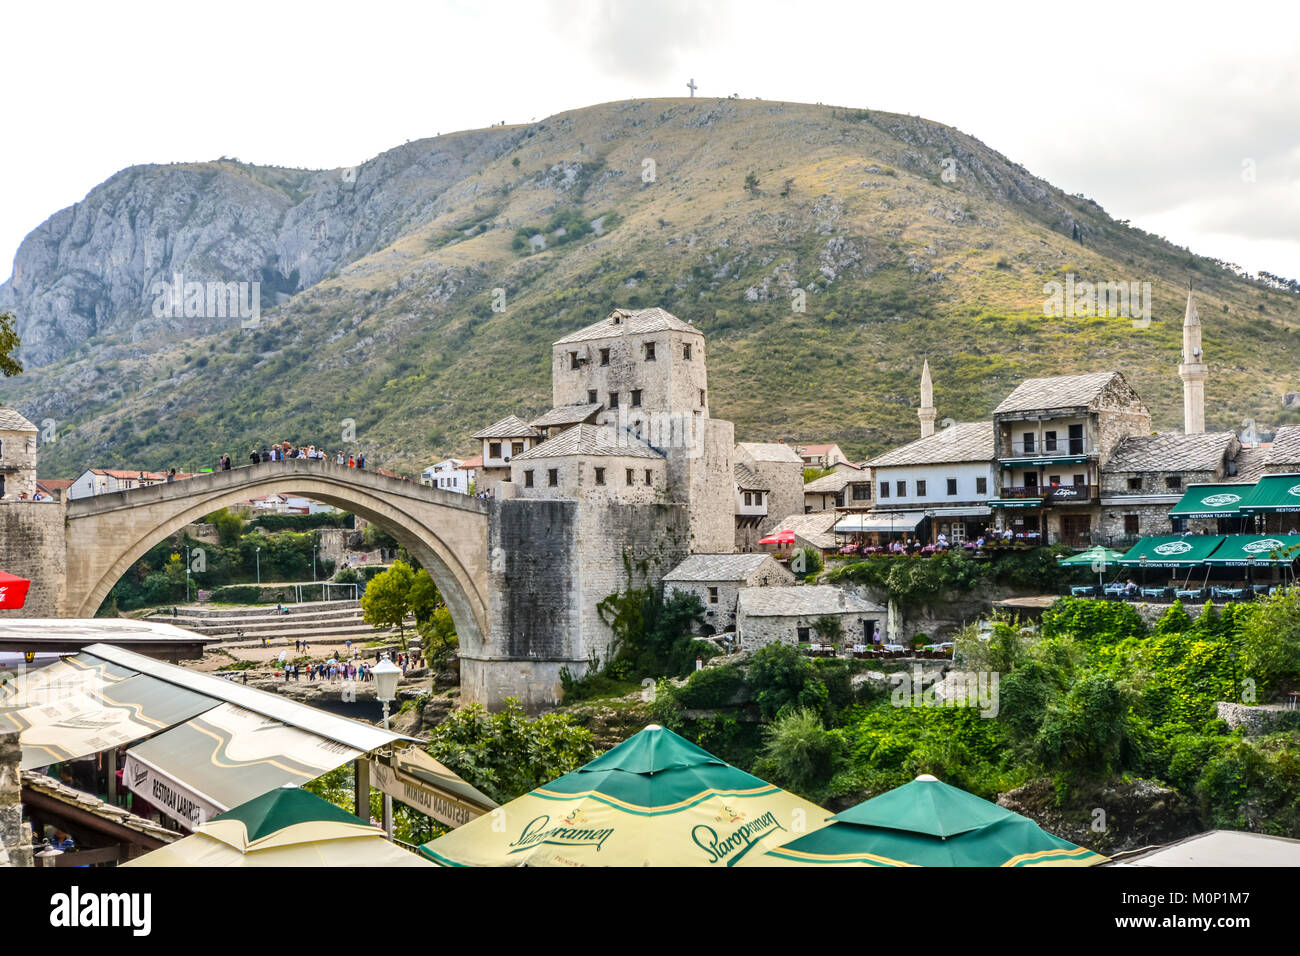 The cross over Mostar on Hum Hill stands atop the mountain overlooking Old Town Mostar, Bosnia Herzegovina with the old bridge below Stock Photo